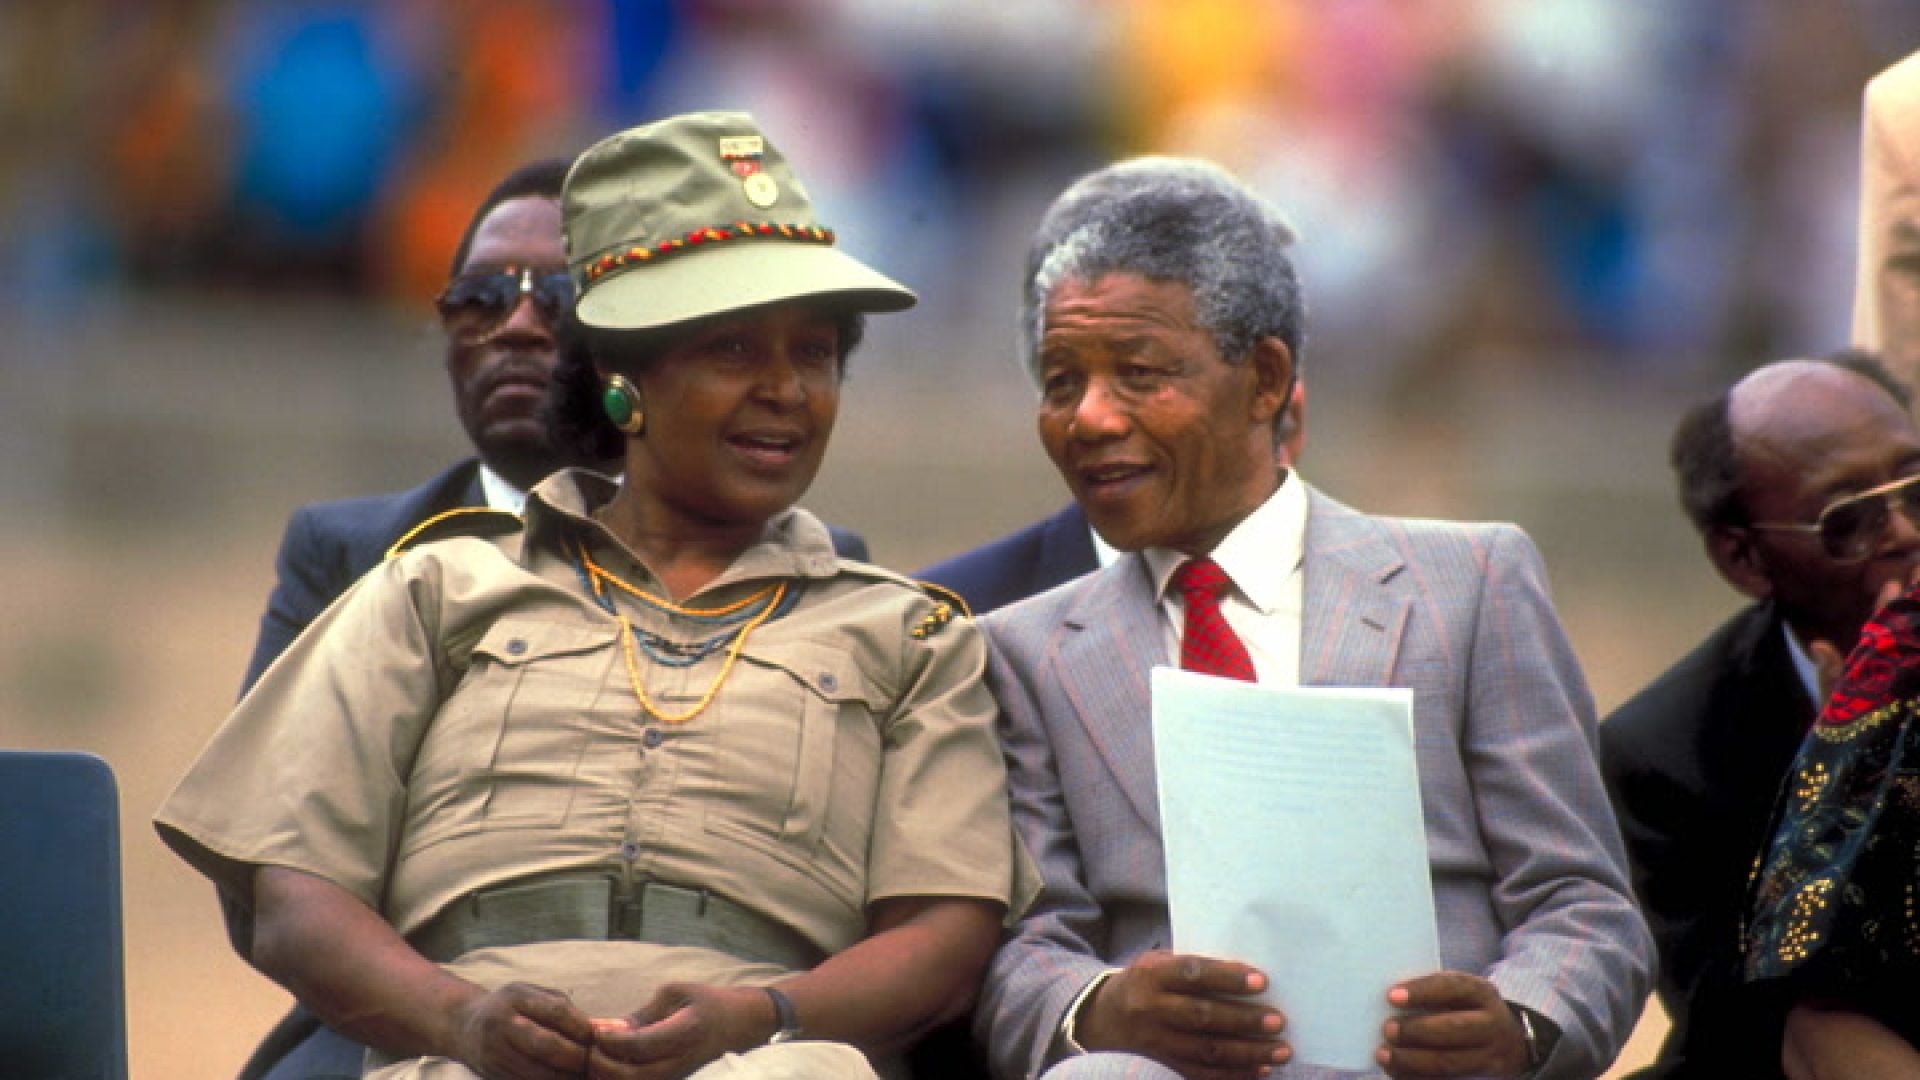 WATCH: In My Feed – Nelson And Winnie Mandela Were The Ultimate Black Power Couple